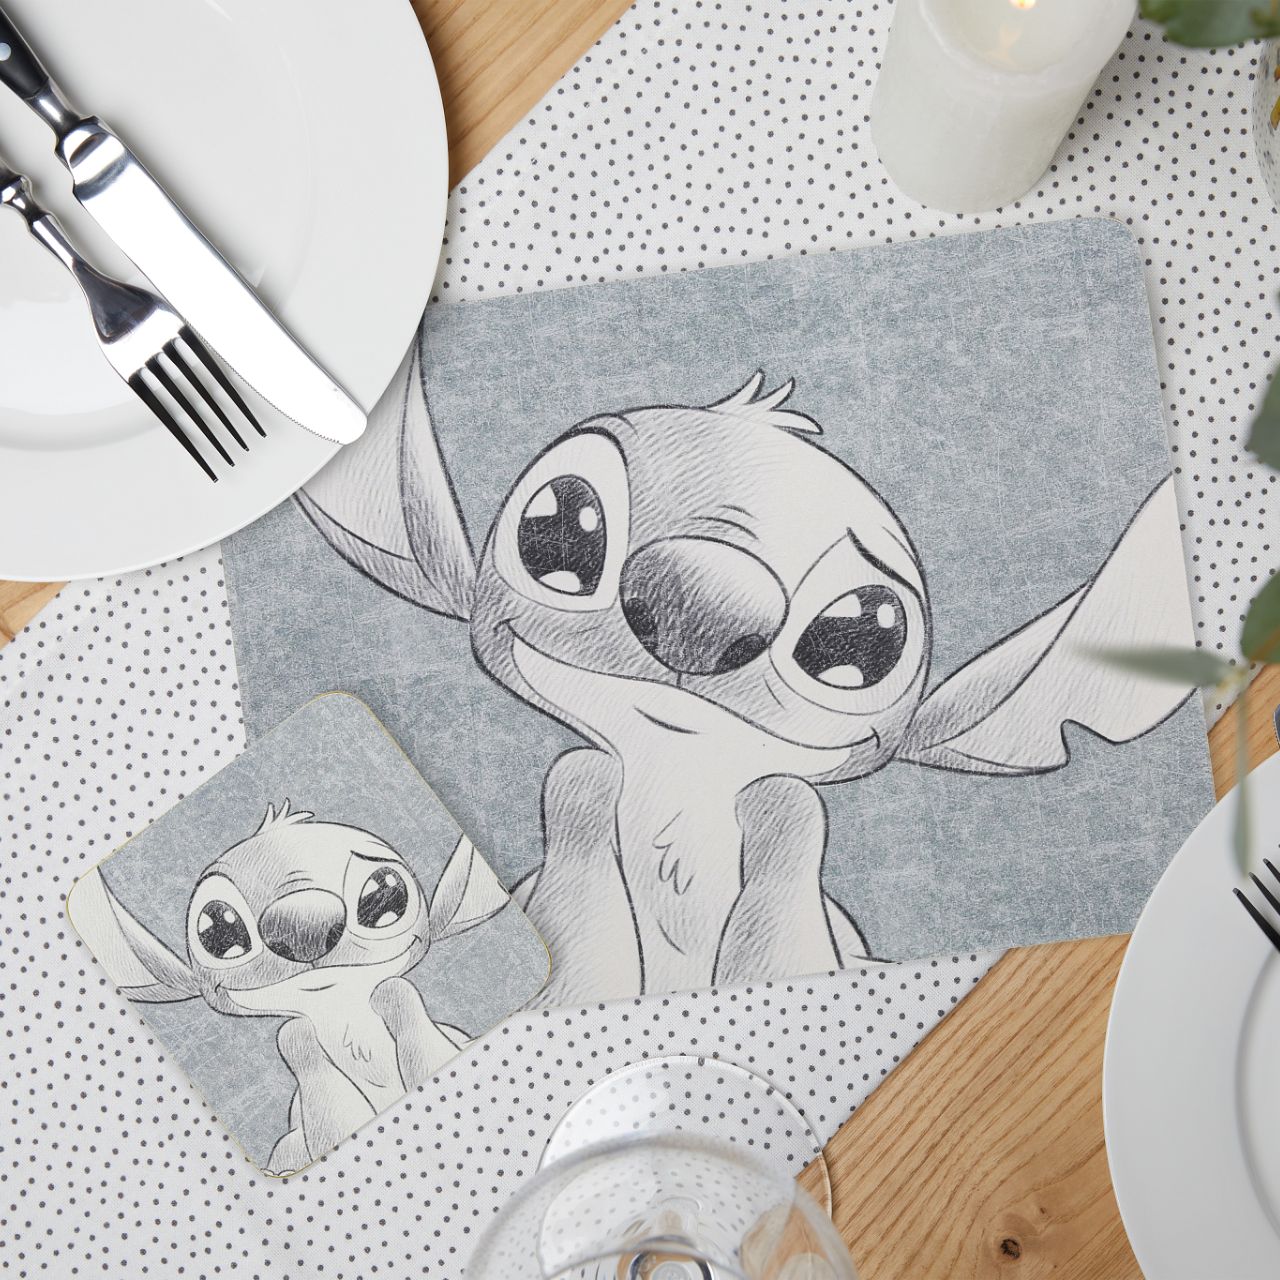 Stitch Ohana Energy Coaster Set of 4  Add a playful touch to your home with these Disney Stitch melamine Coasters. Featuring the lovable alien from the much-loved movie, Lilo and Stitch, these coasters will bring a smile to your face every time you use them. The set of four coasters each featuring an eye-catching illustration of Stitch and can be coordinated with our Stitch placemats.